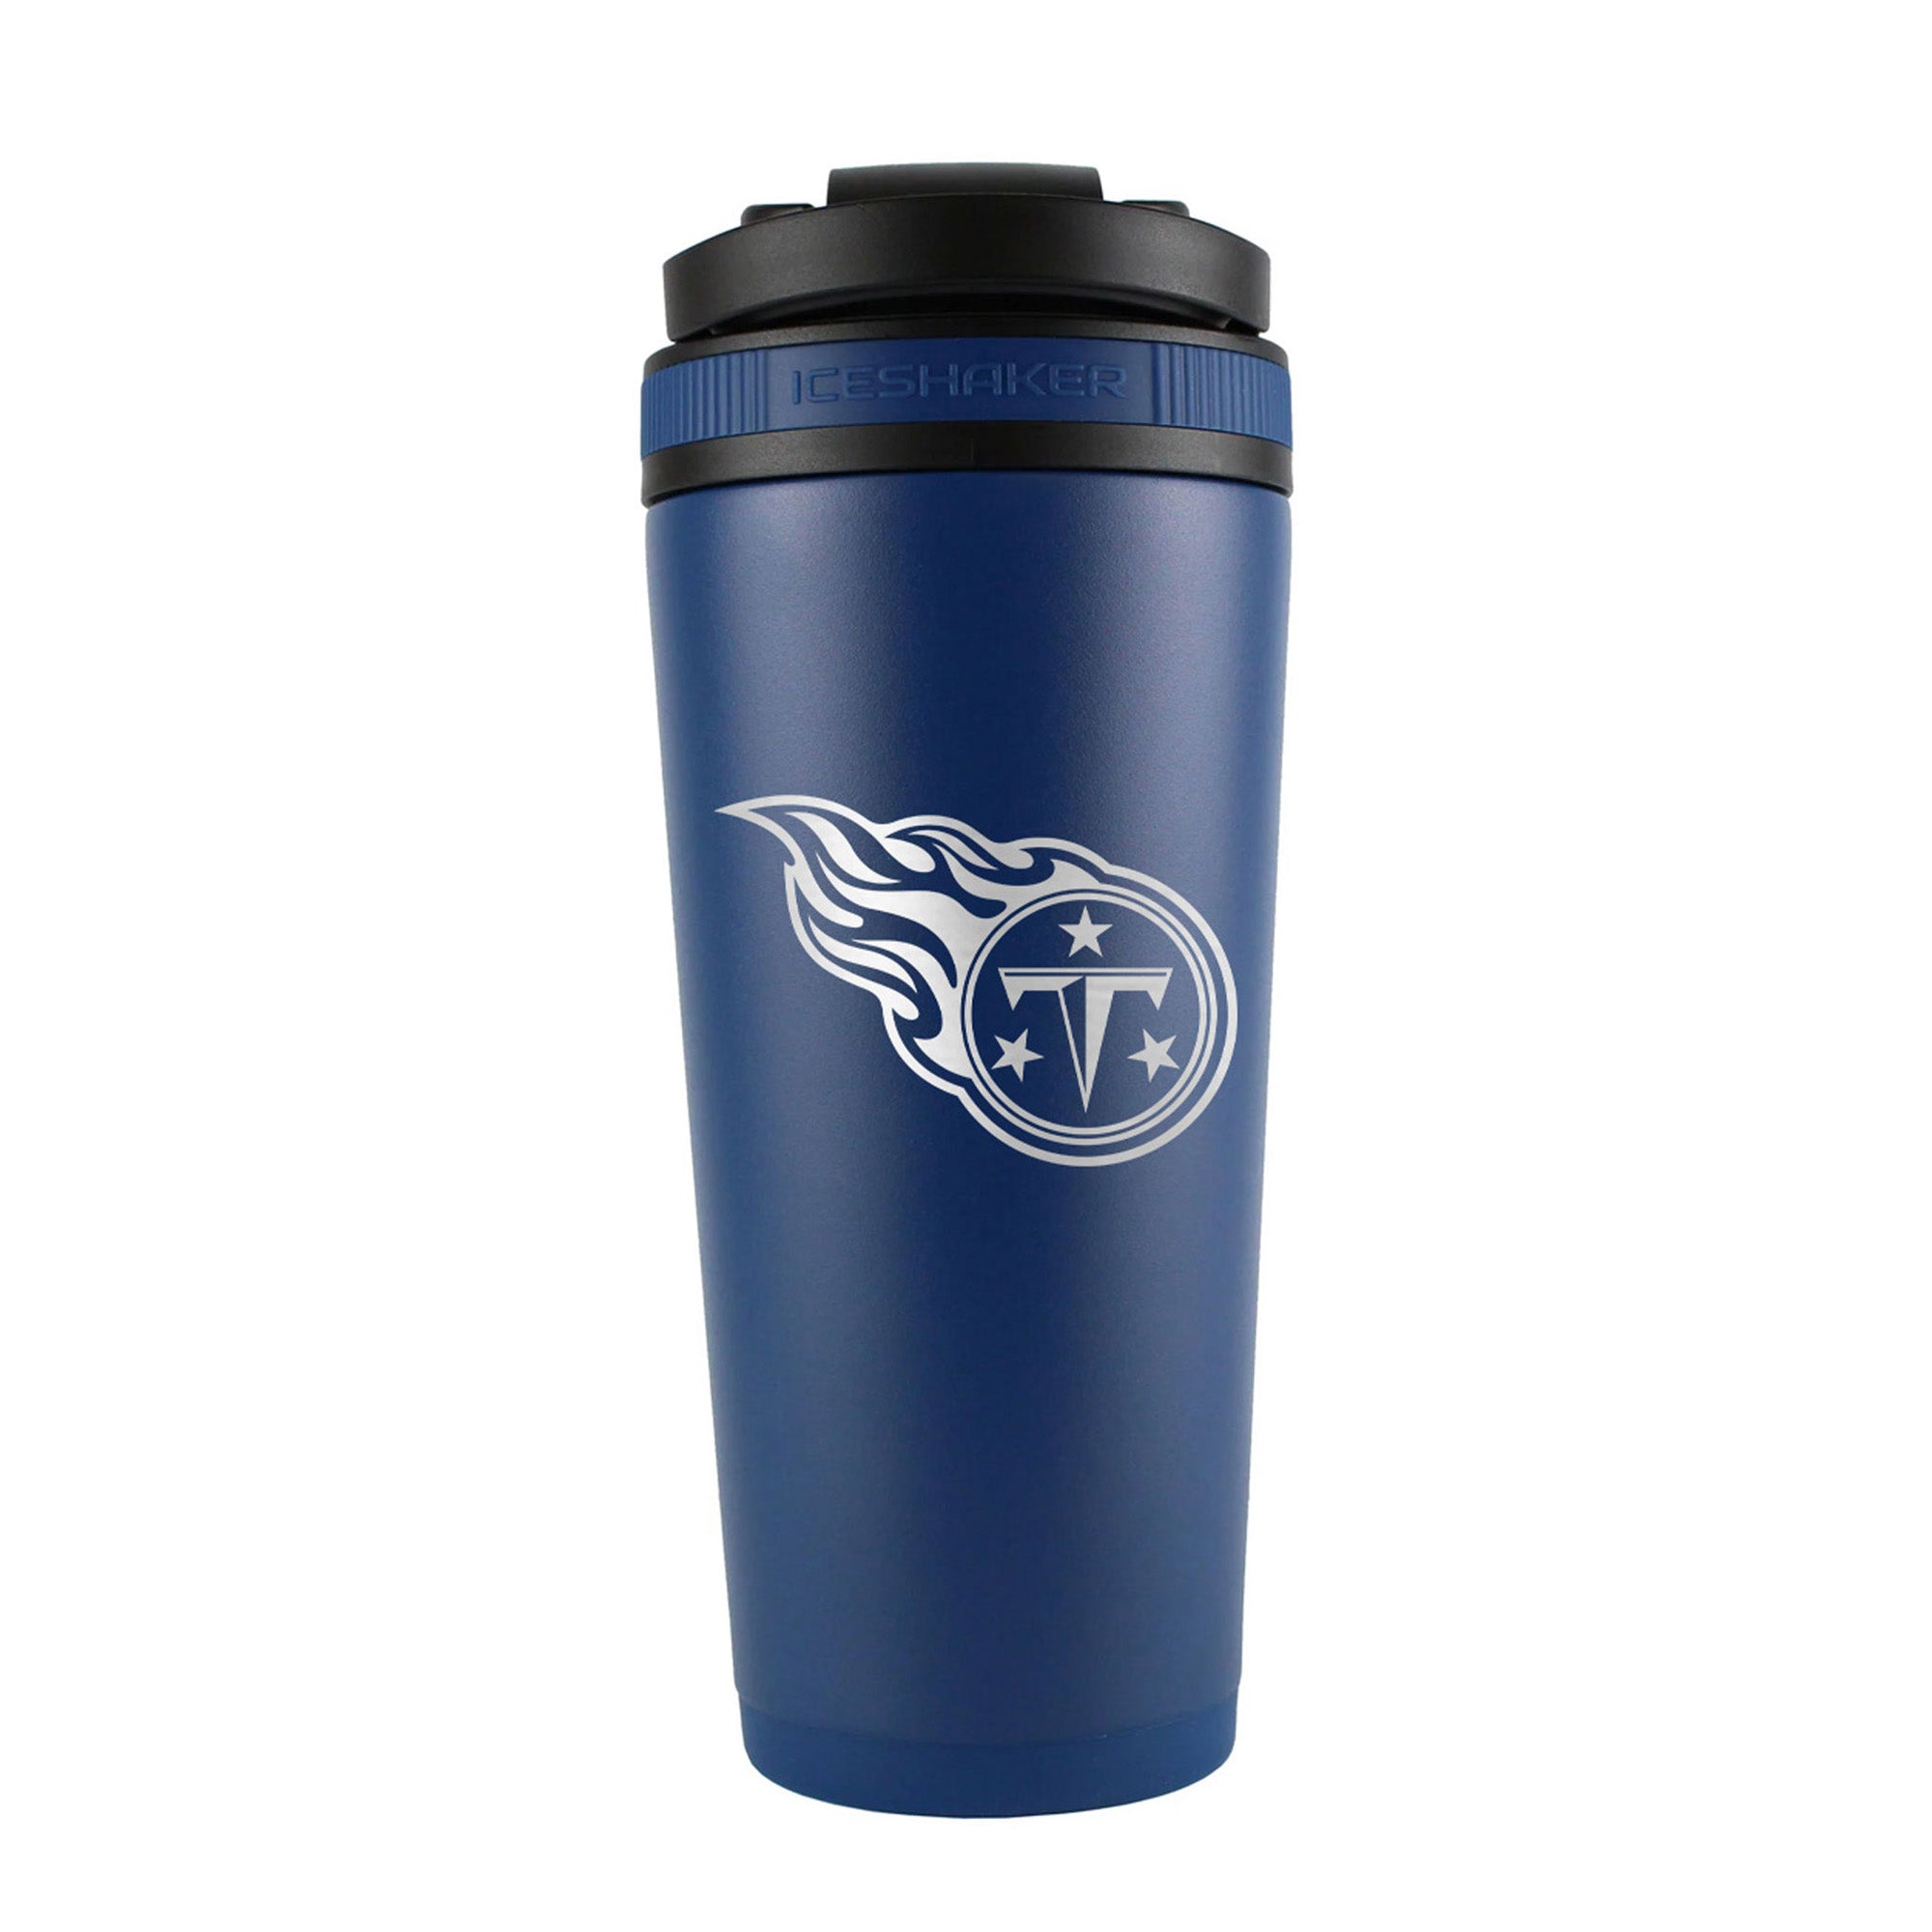 Officially Licensed Tennessee Titans 26oz Ice Shaker